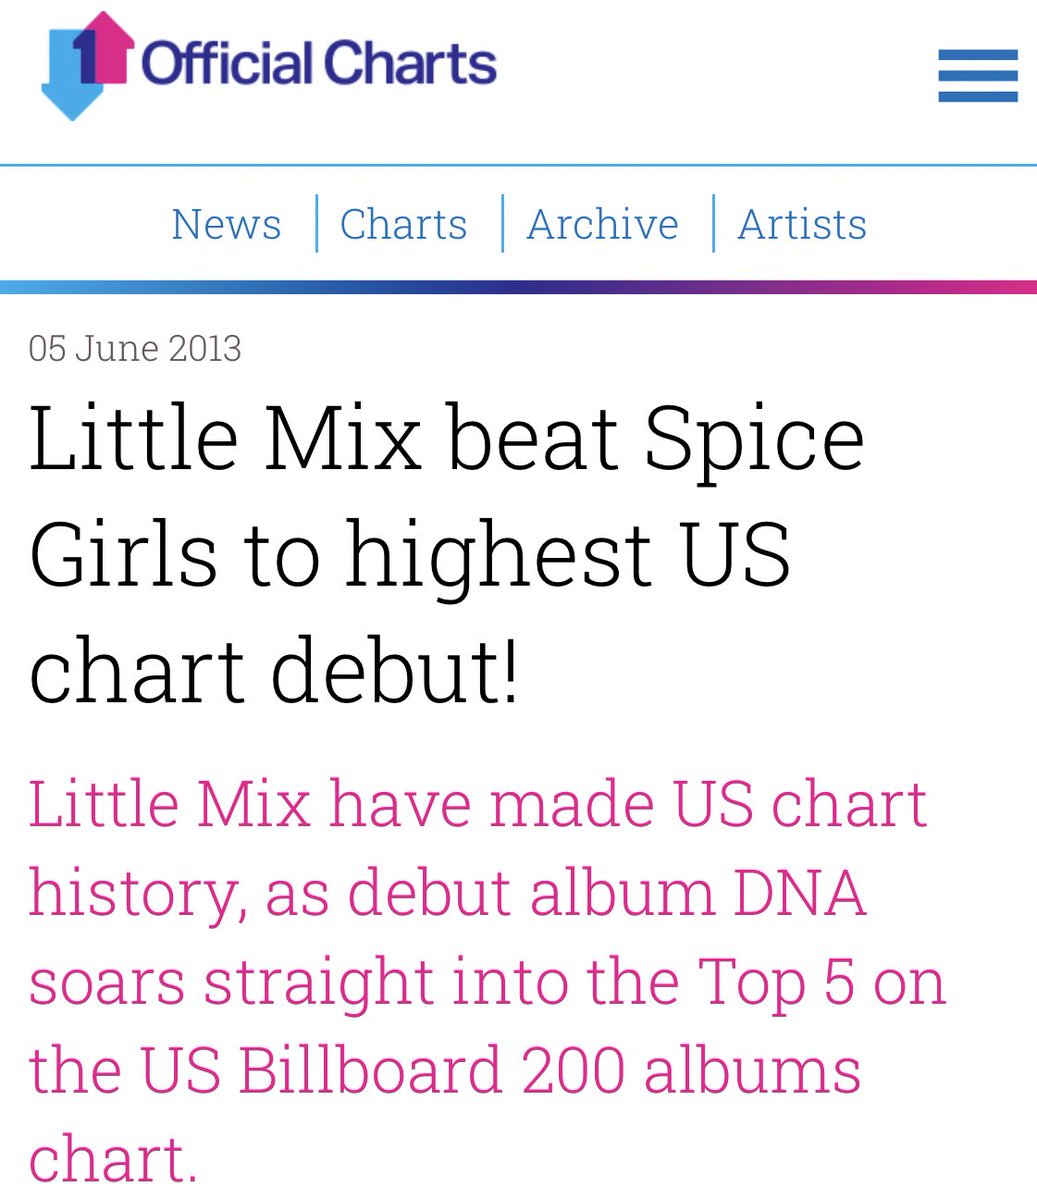 it was said that little mix would crack the us easily cause they had the full package, also their first album charted well. let’s not forget that they were under the same label as one direction who was thriving for a year already, majorly promoting in the us